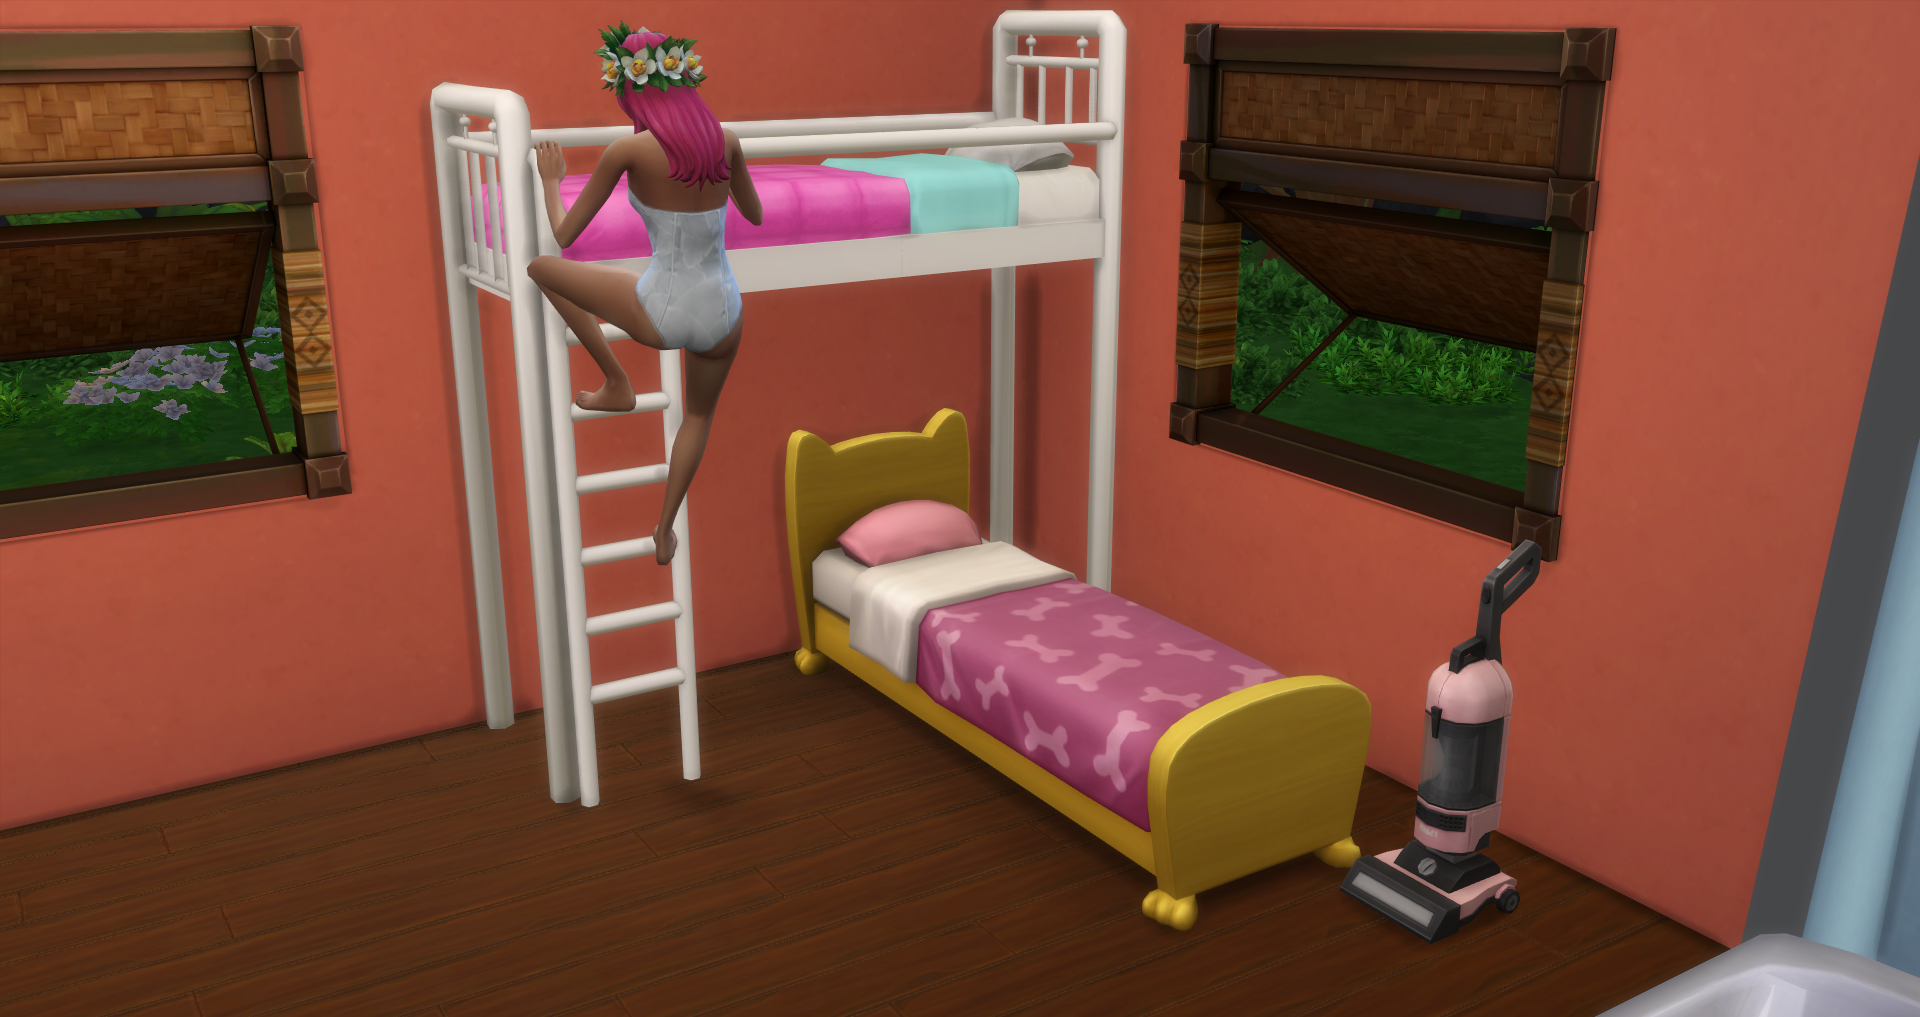 Bunk Beds Finally Added To The Sims 4, How To Make Bunk Beds Sims 4